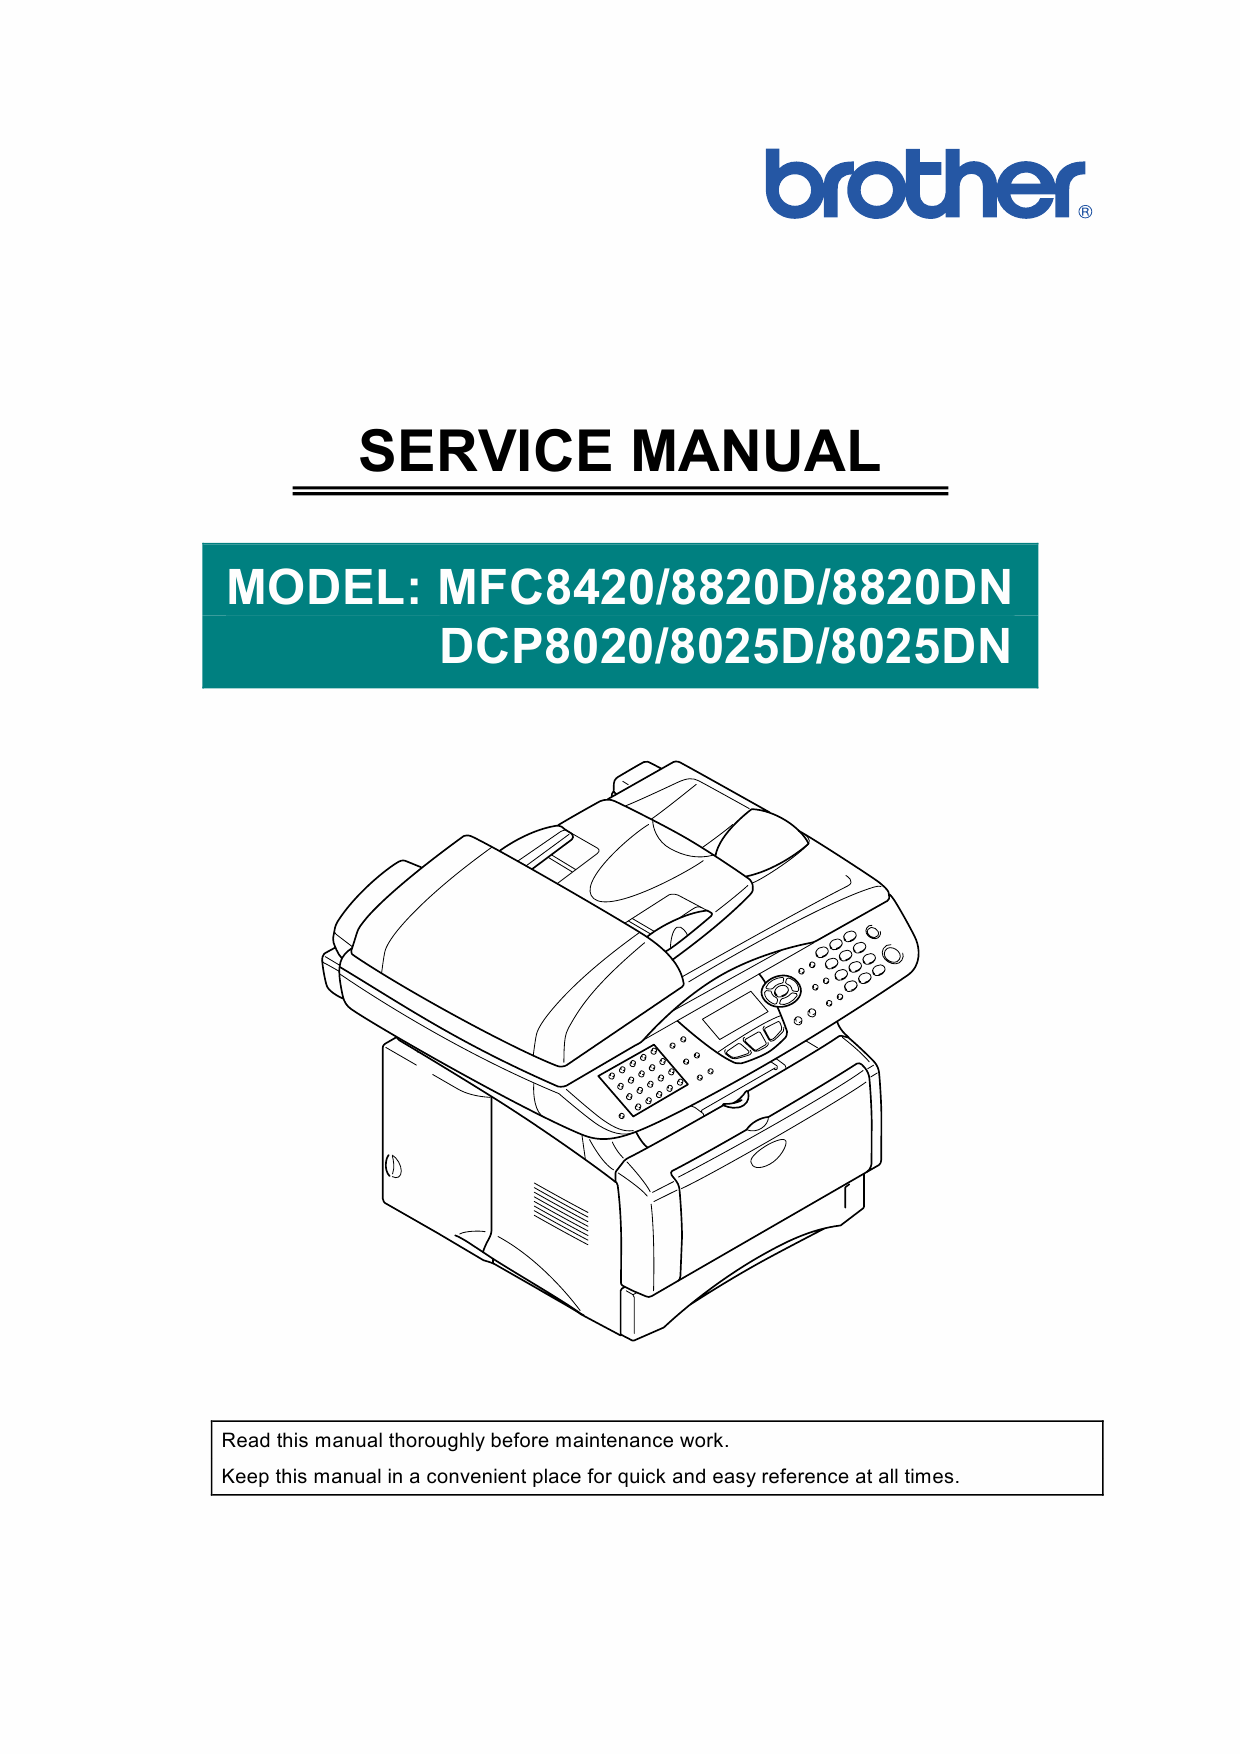 Brother MFC 8420 8820D 8820DN DCP8020 8025D 8025DN Service Manual-1